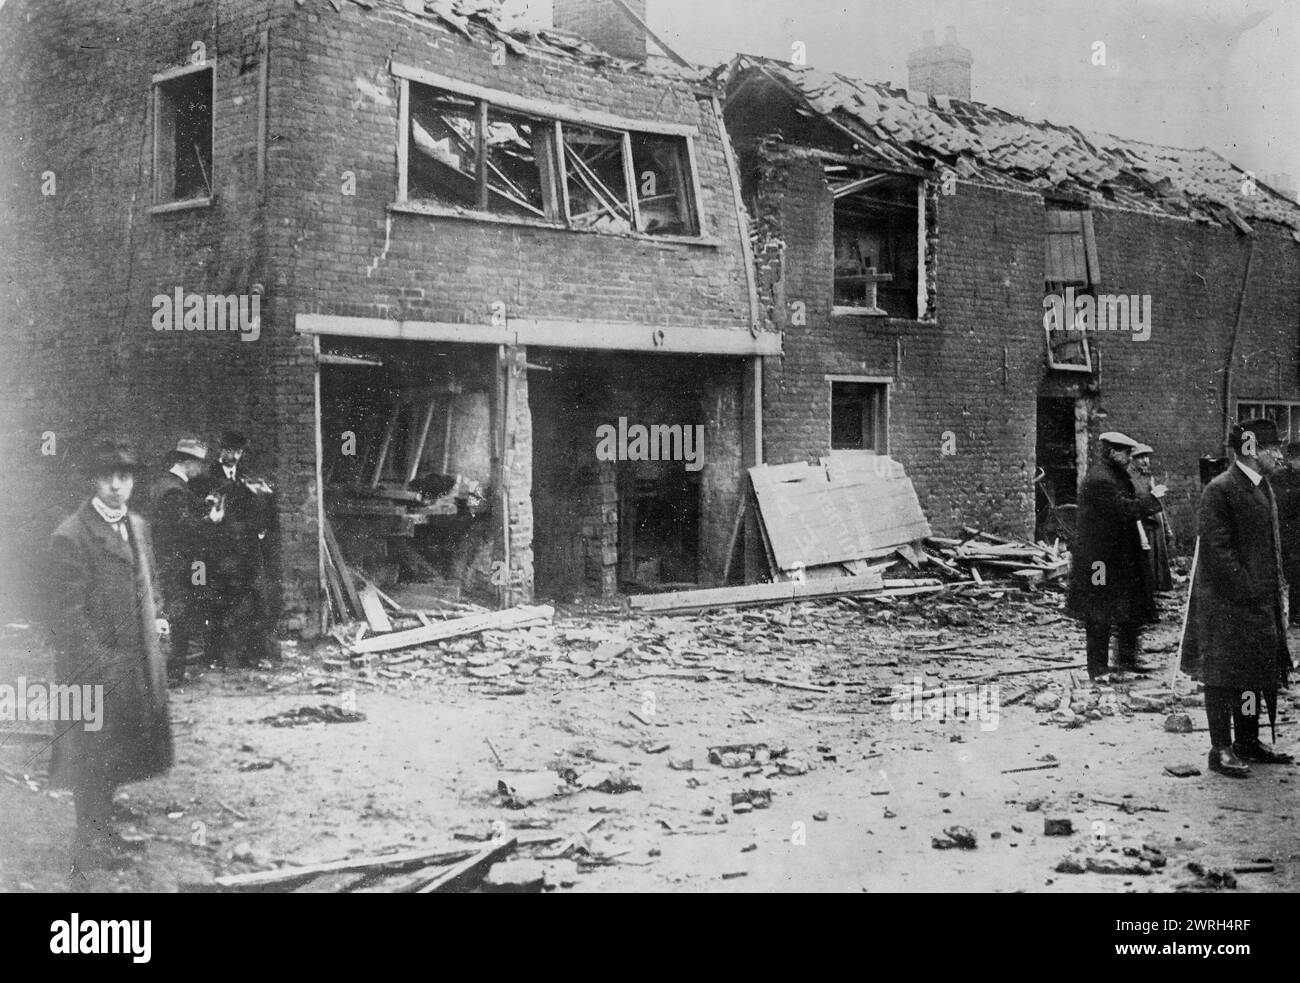 Bomb wrecked houses, Yarmouth, 1915. Homes in Great Yarmouth, England which were damaged by bombs dropped by the German Zeppelin L3 on January 19, 1915 during World War I. Stock Photo